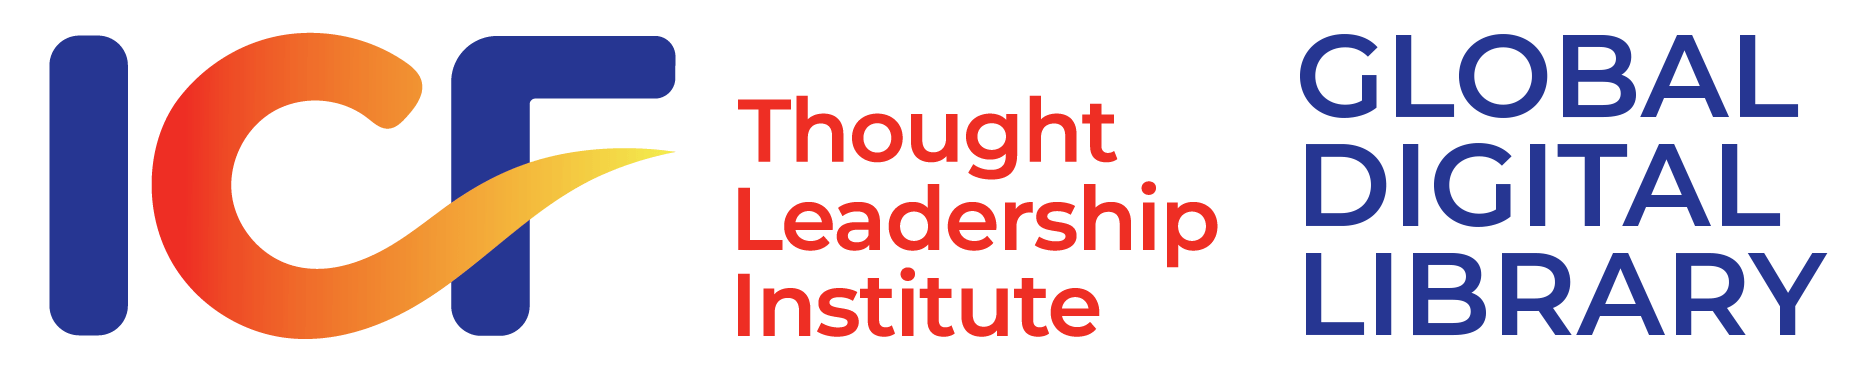 Global Digital Library — Thought Leadership Institute